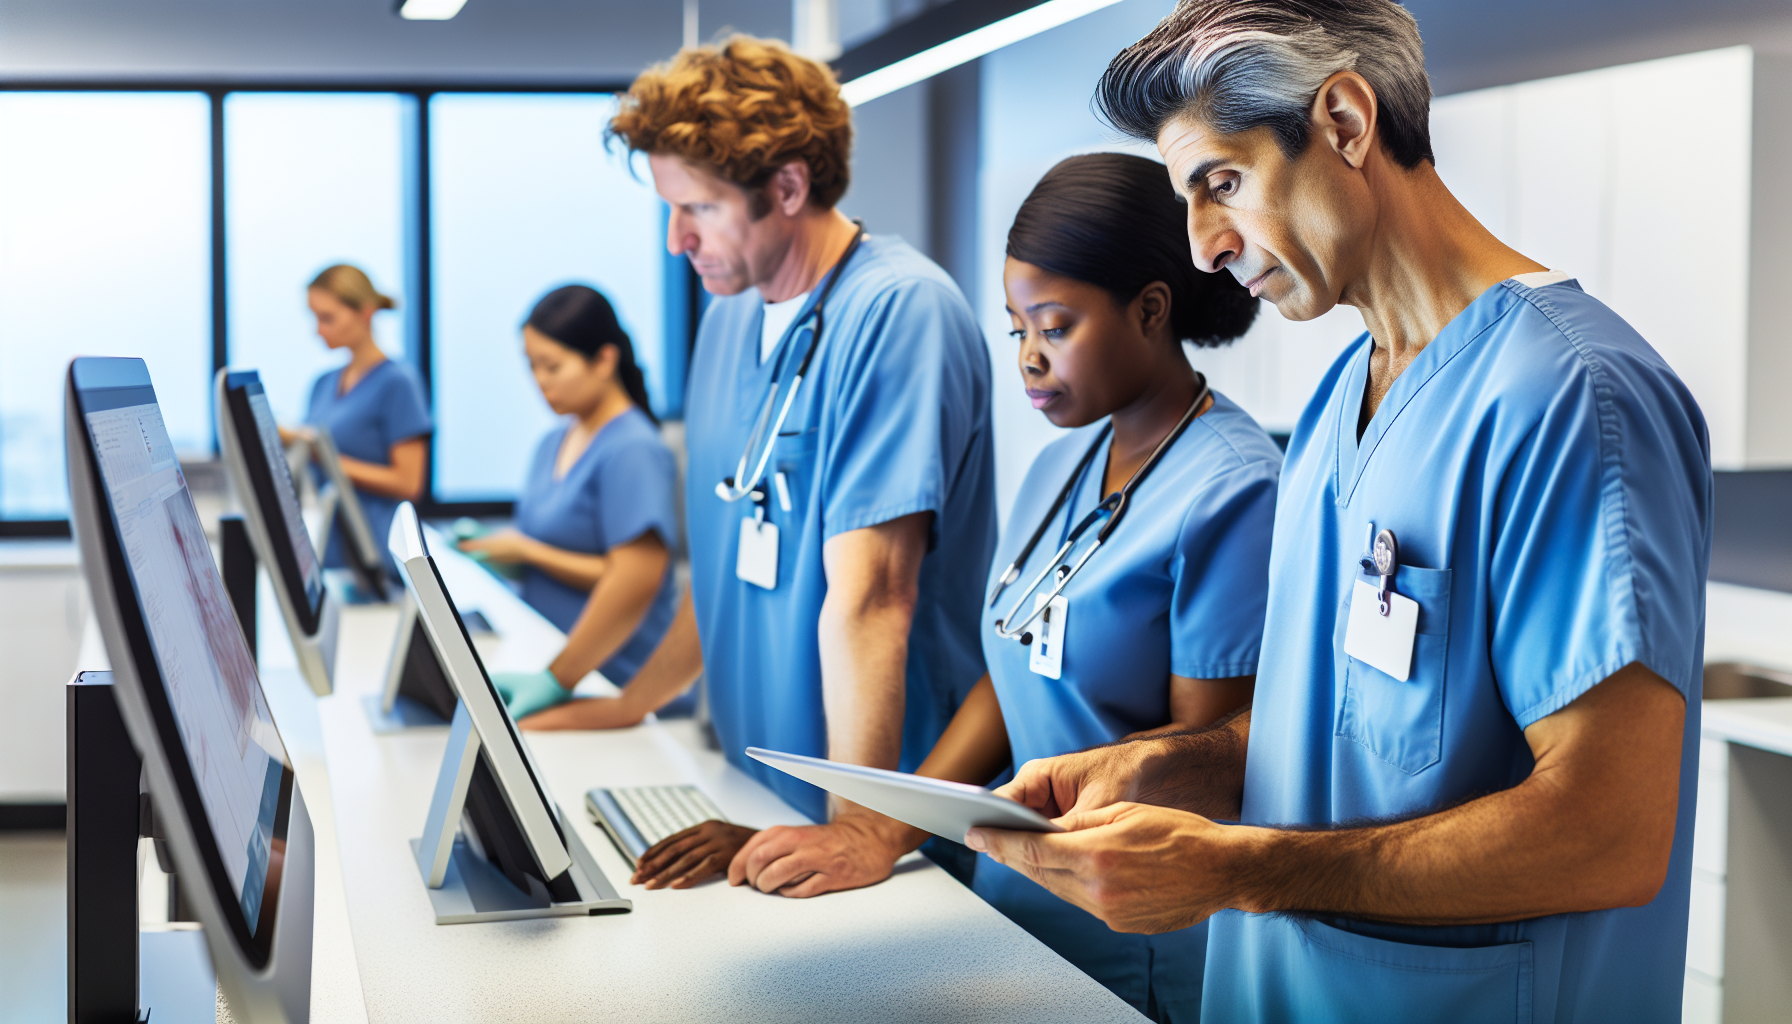 Healthcare professionals using technology to streamline tasks